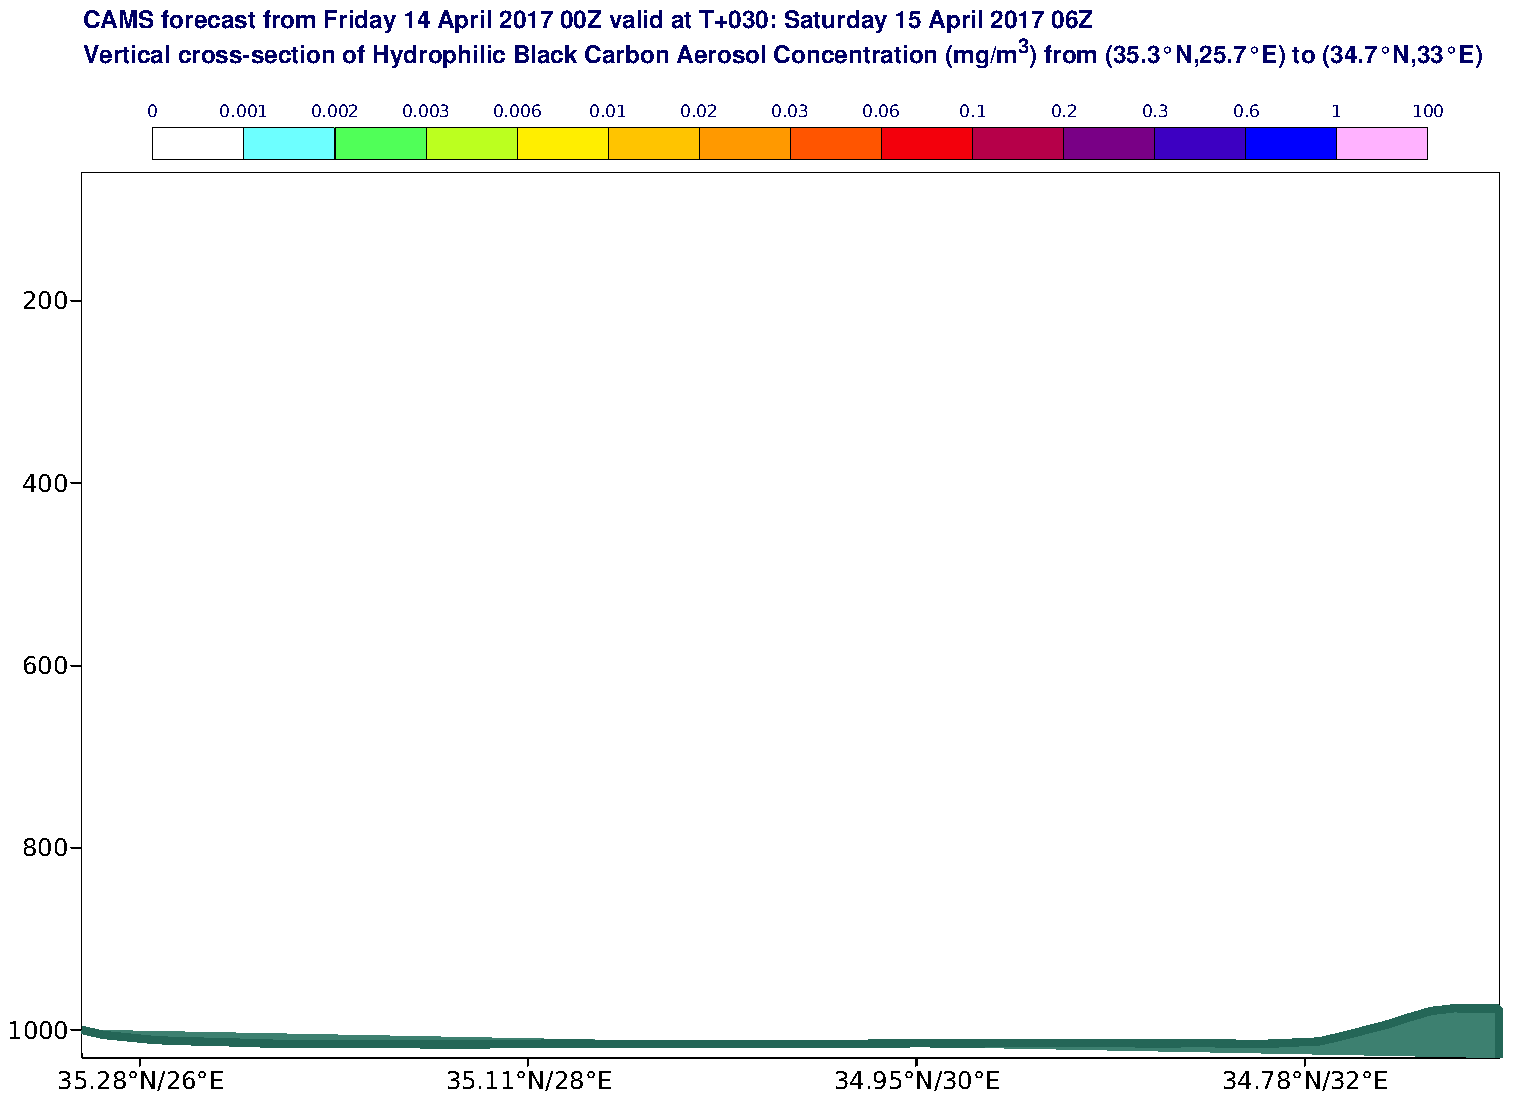 Vertical cross-section of Hydrophilic Black Carbon Aerosol Concentration (mg/m3) valid at T30 - 2017-04-15 06:00